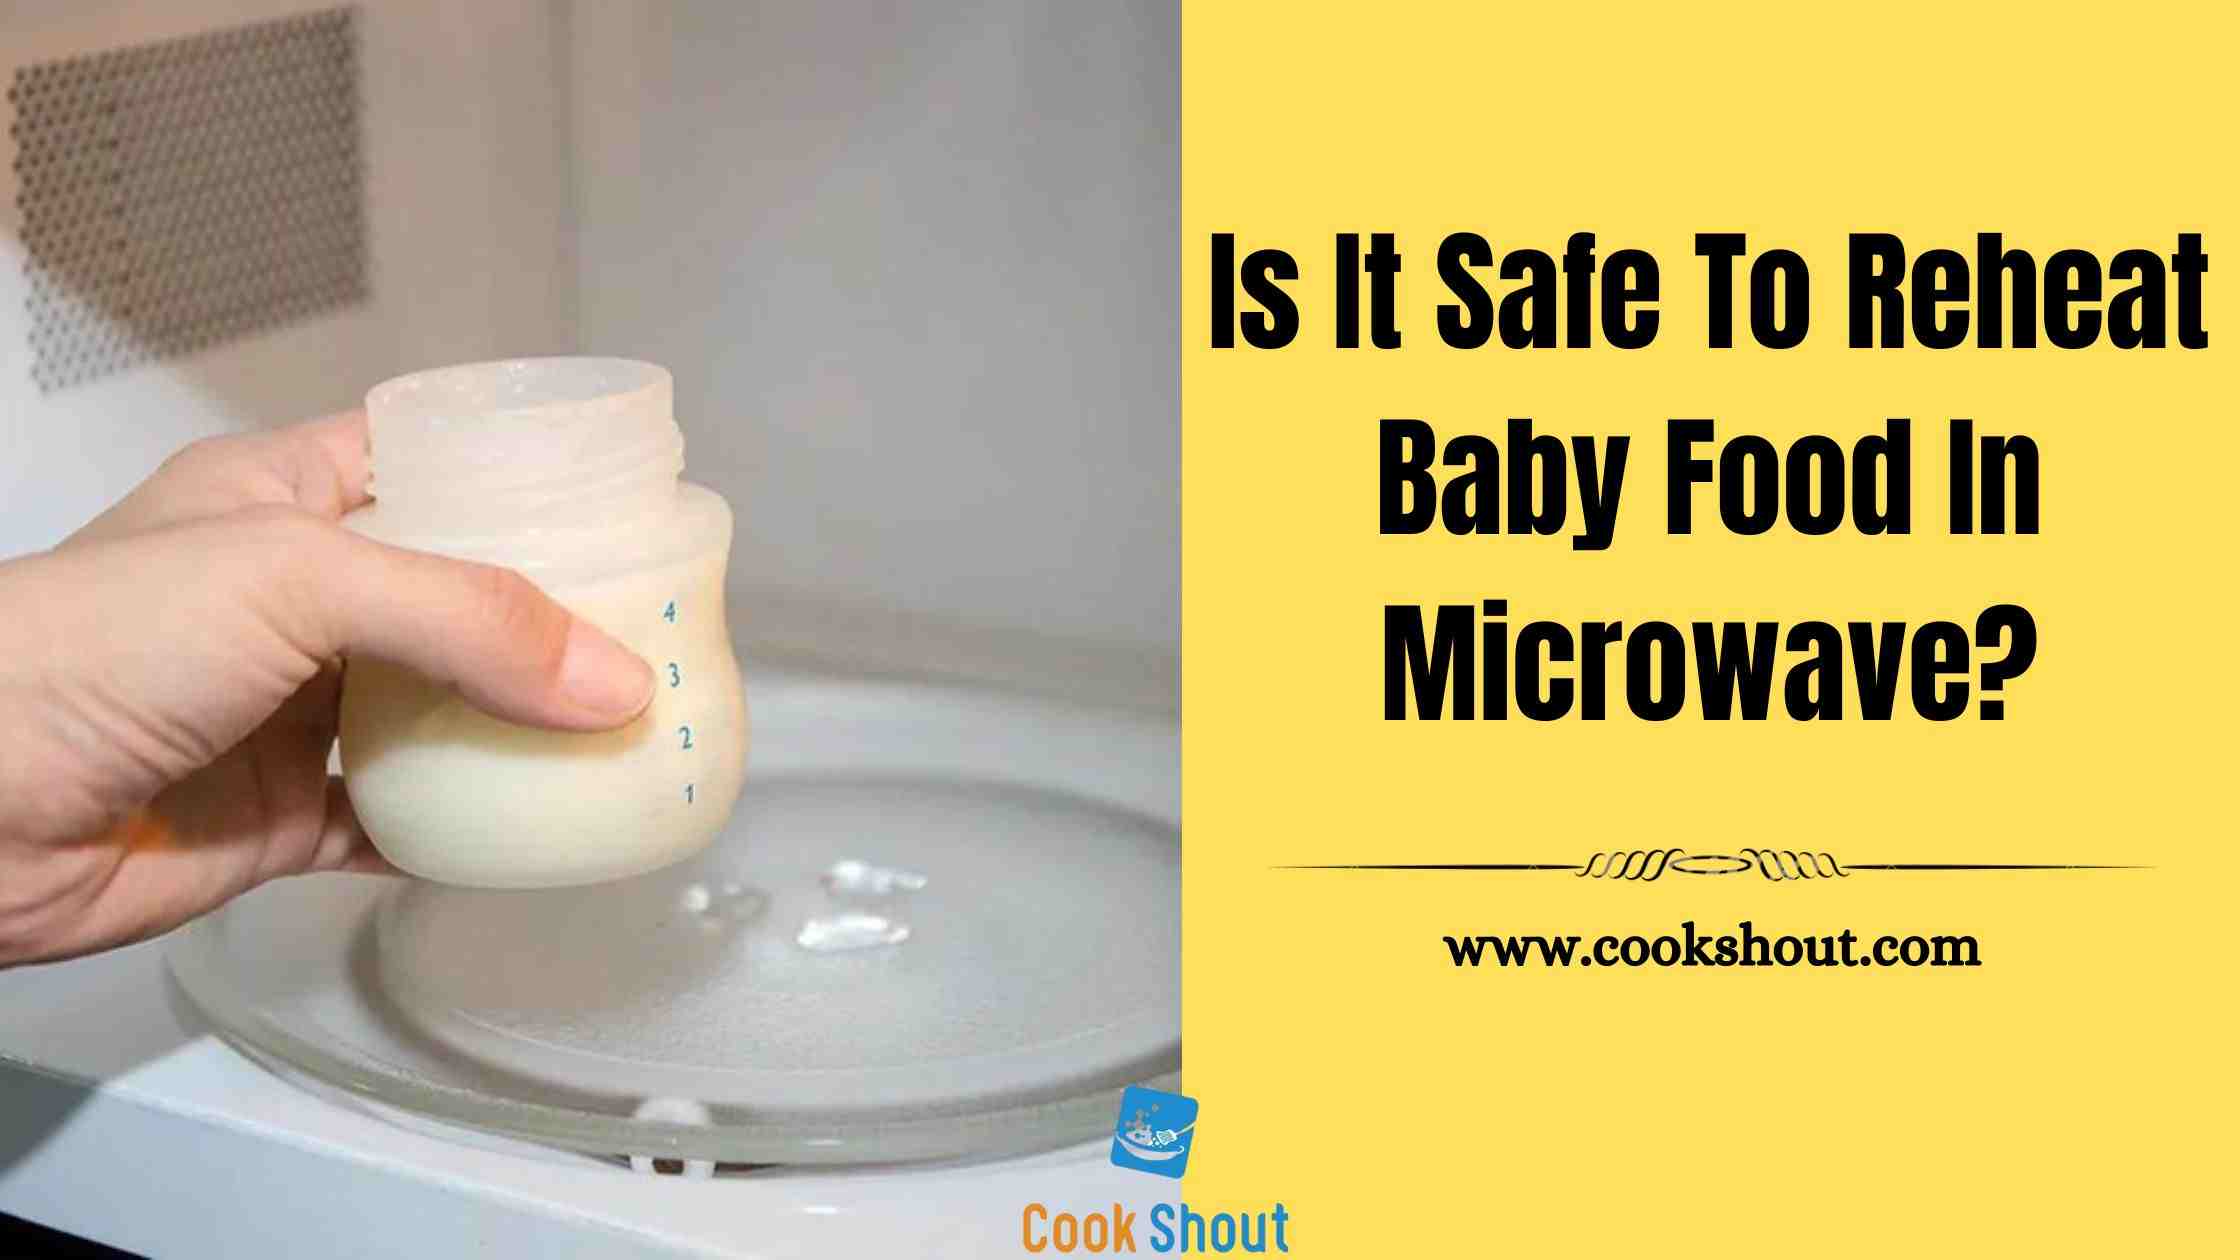 Is It Safe To Reheat Baby Food In Microwave